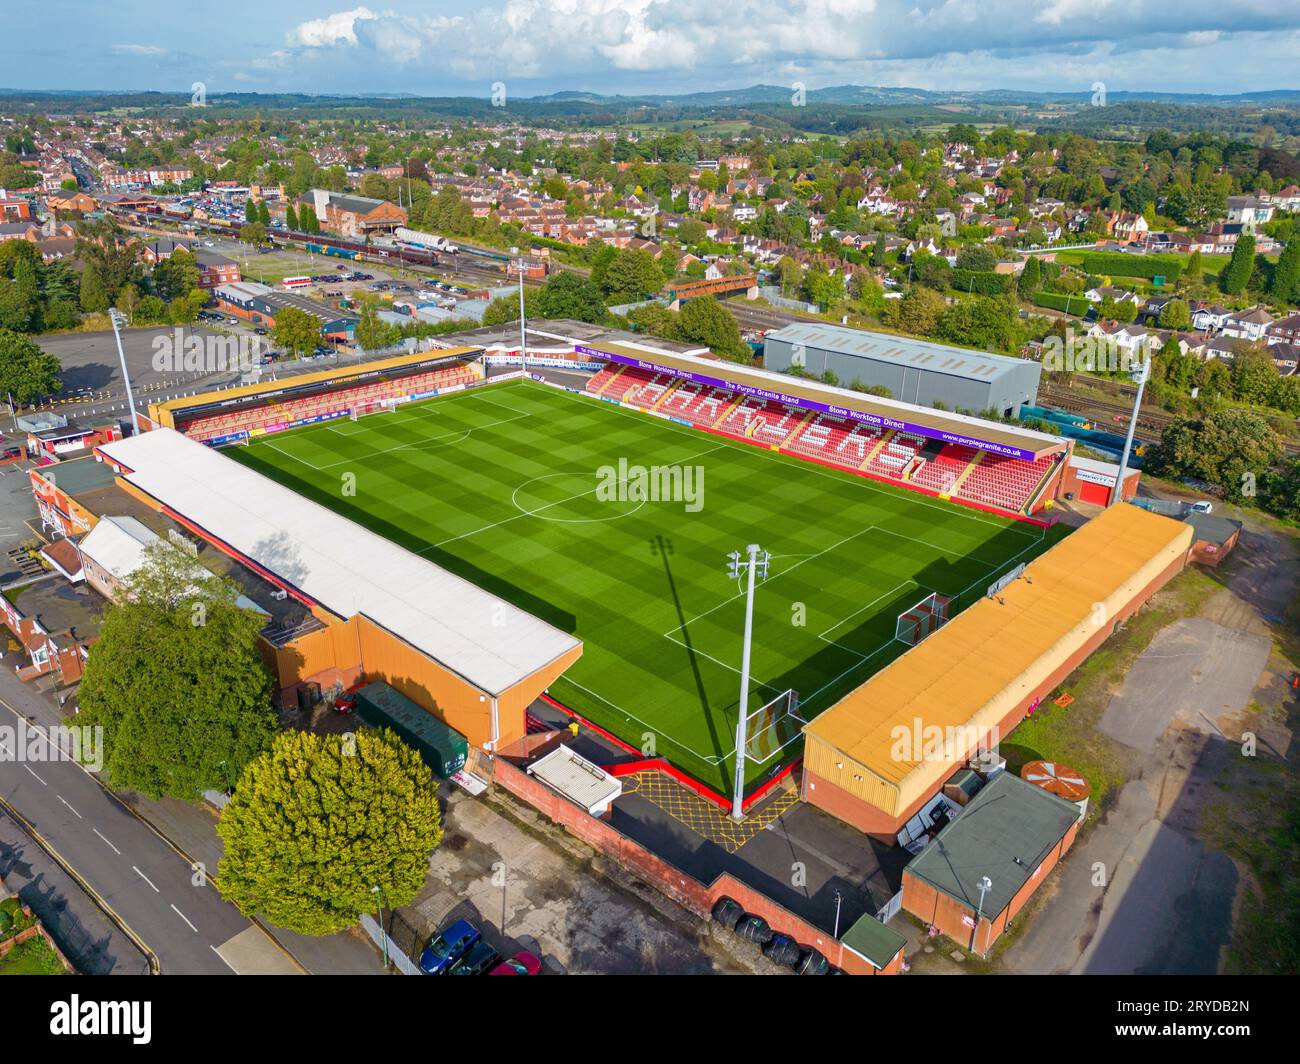 Kidderminster Harriers FC - Hi, I'm Aggborough Stadium. You may remember me  from such home league games as Altrincham and Blyth Spartans. I'm back at  3pm today. Come and see me!